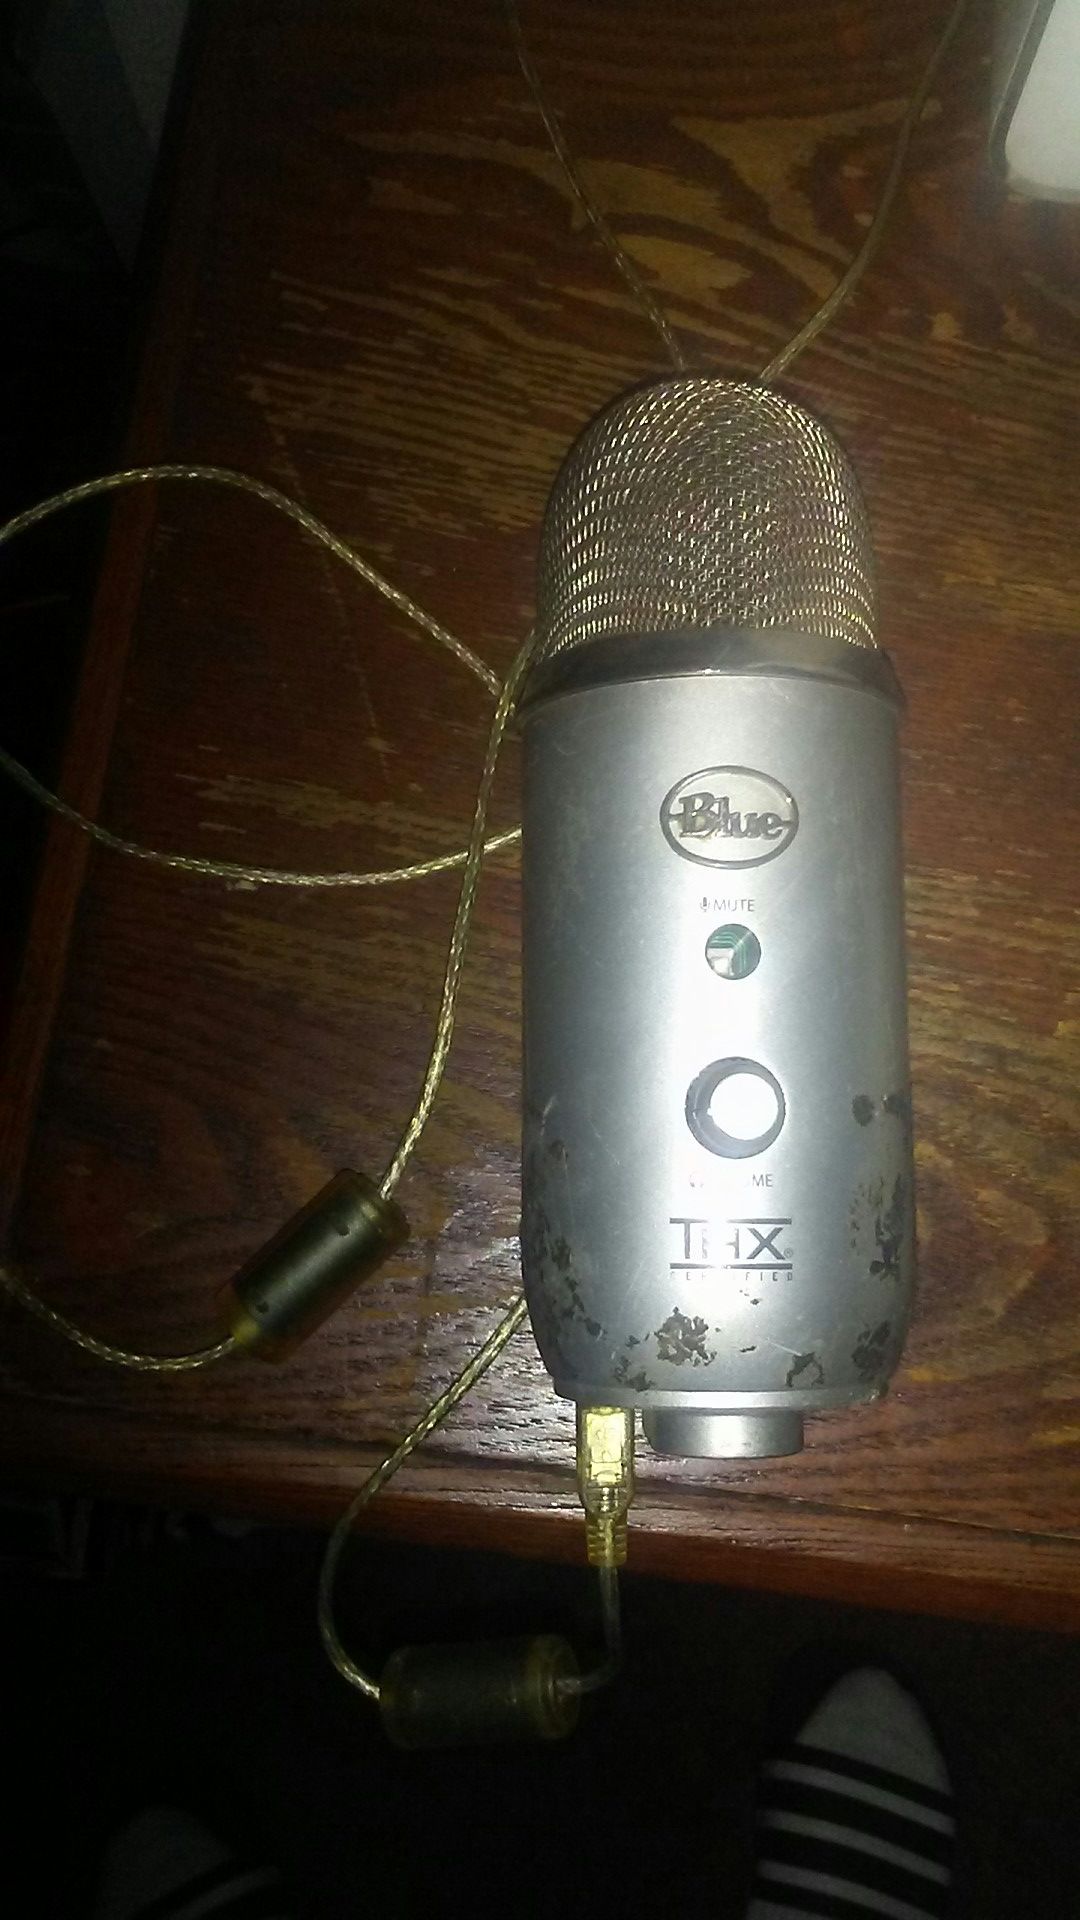 Blue yeti mic for the low... Its ugly but it works good!